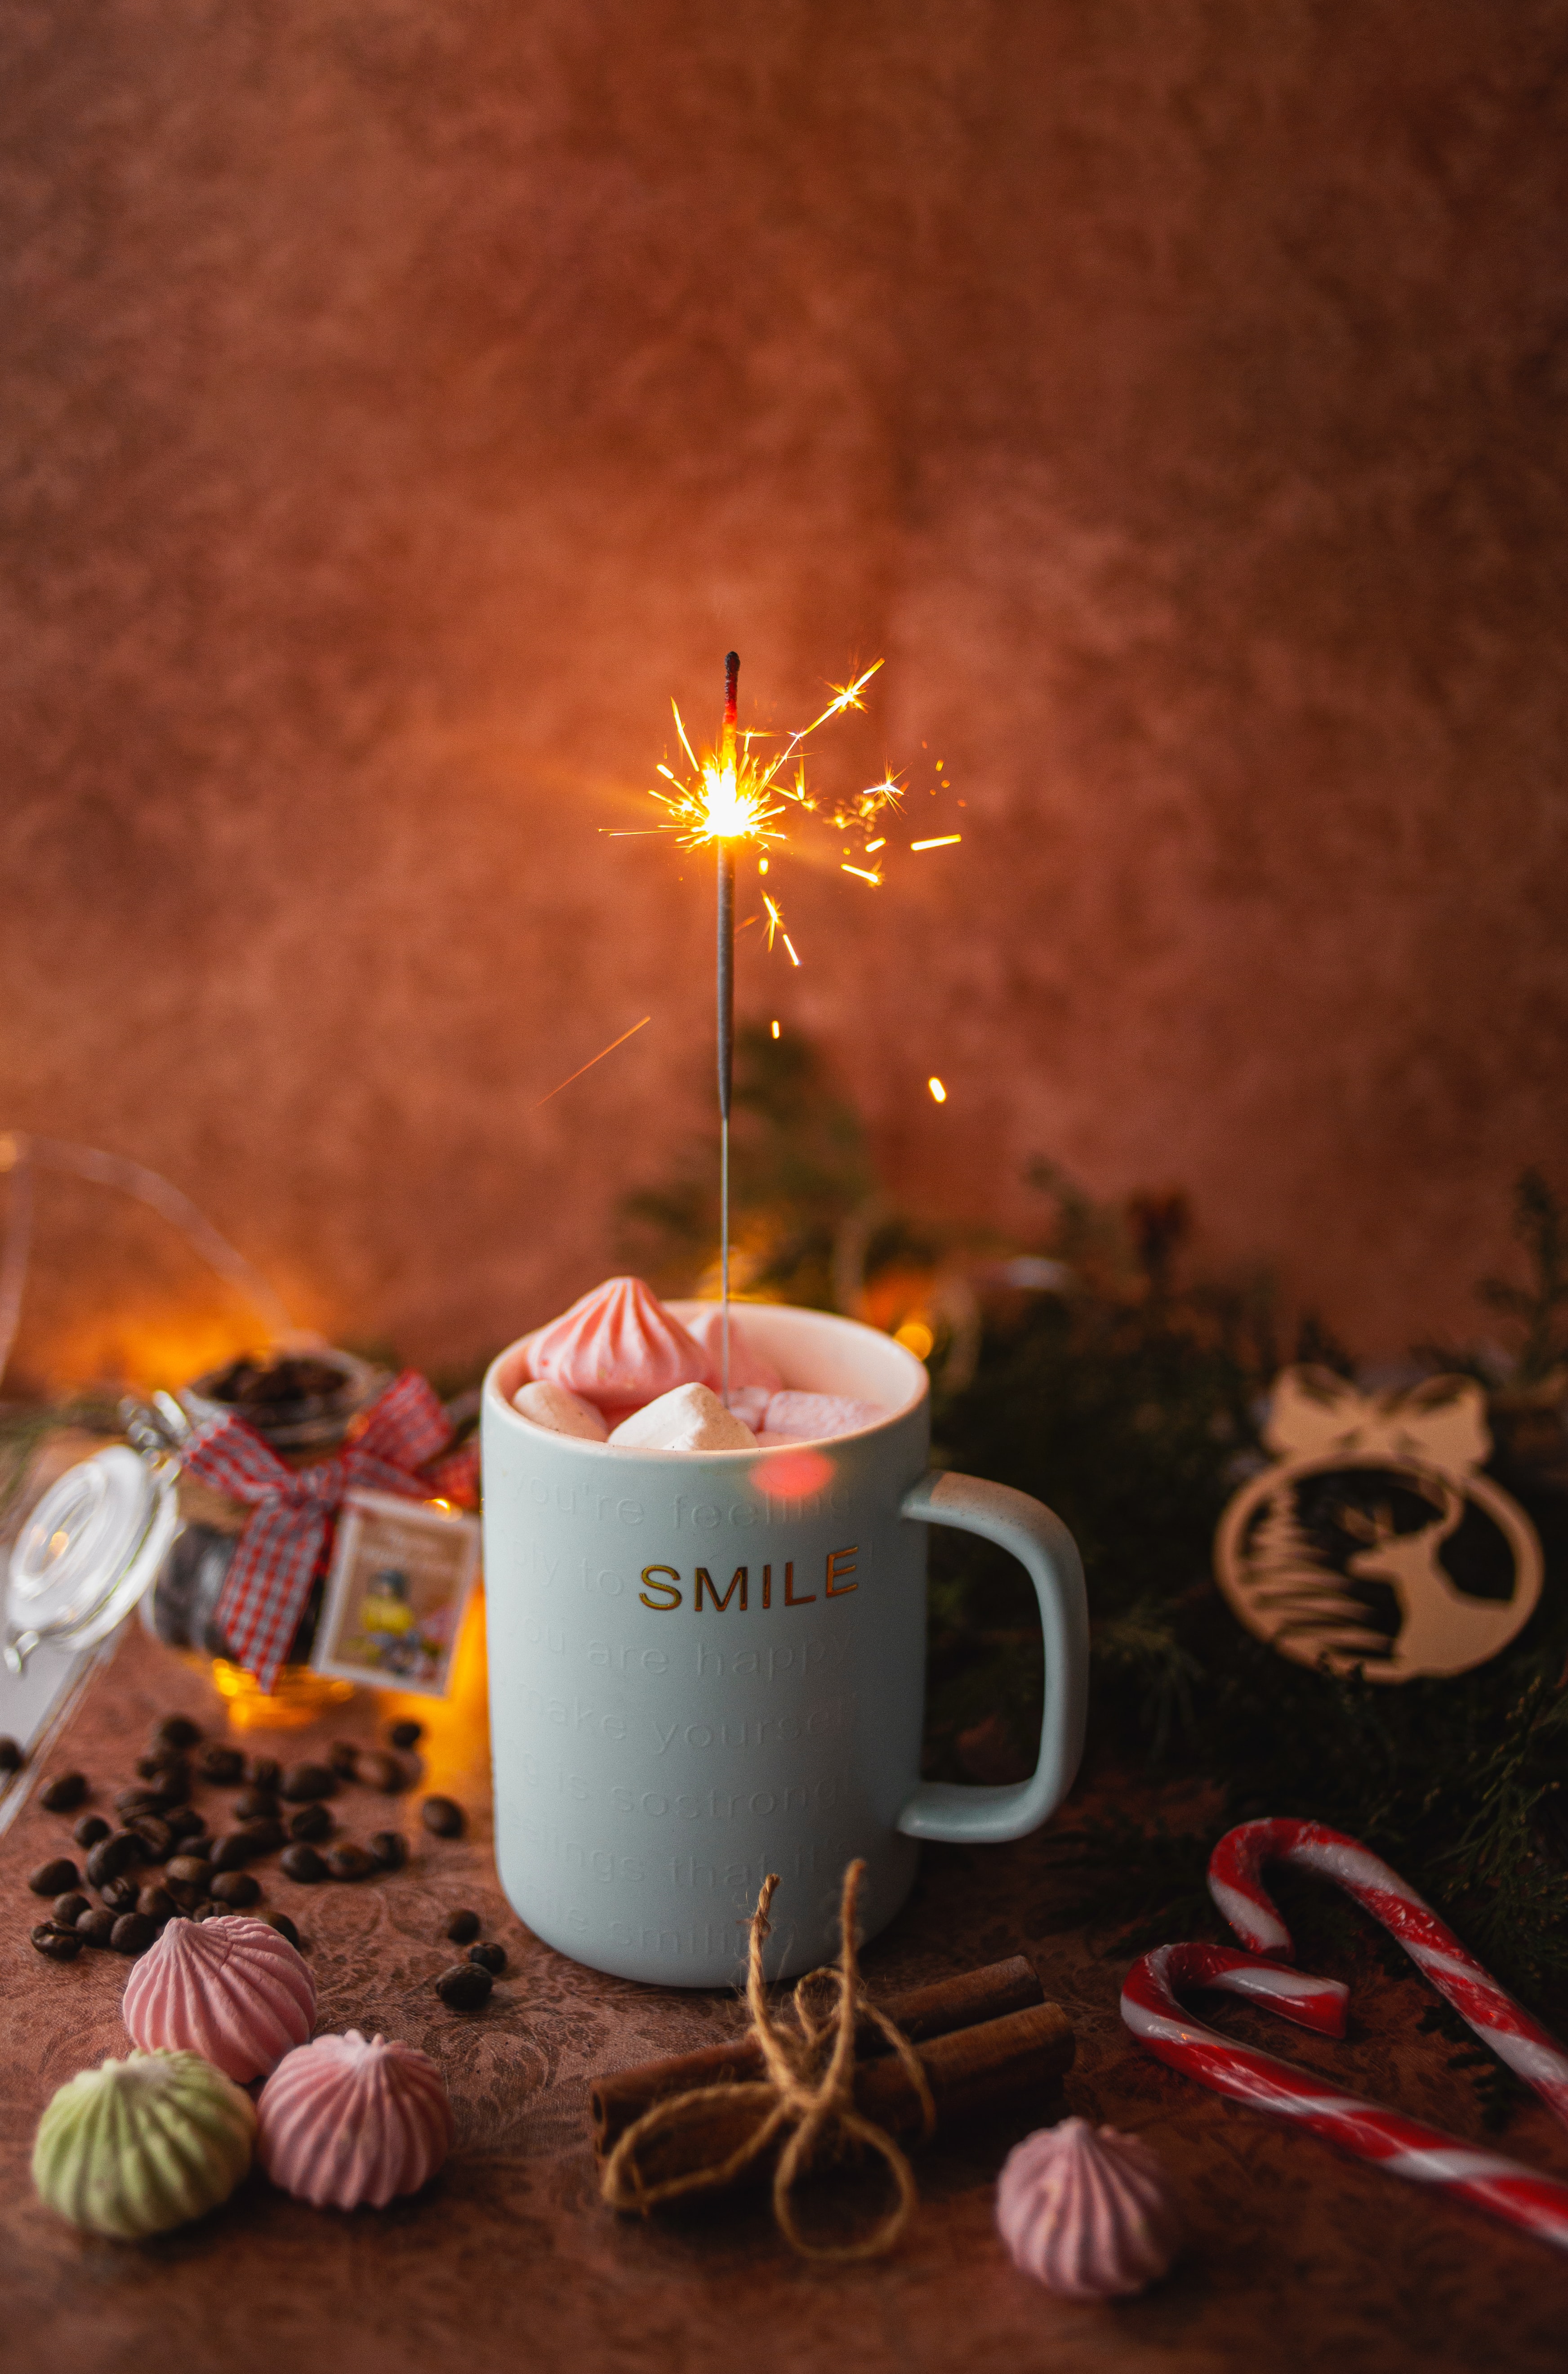 Mobile wallpaper miscellanea, mug, holiday, sparks, cup, miscellaneous, marshmallow, bengal lights, sparklers, zephyr